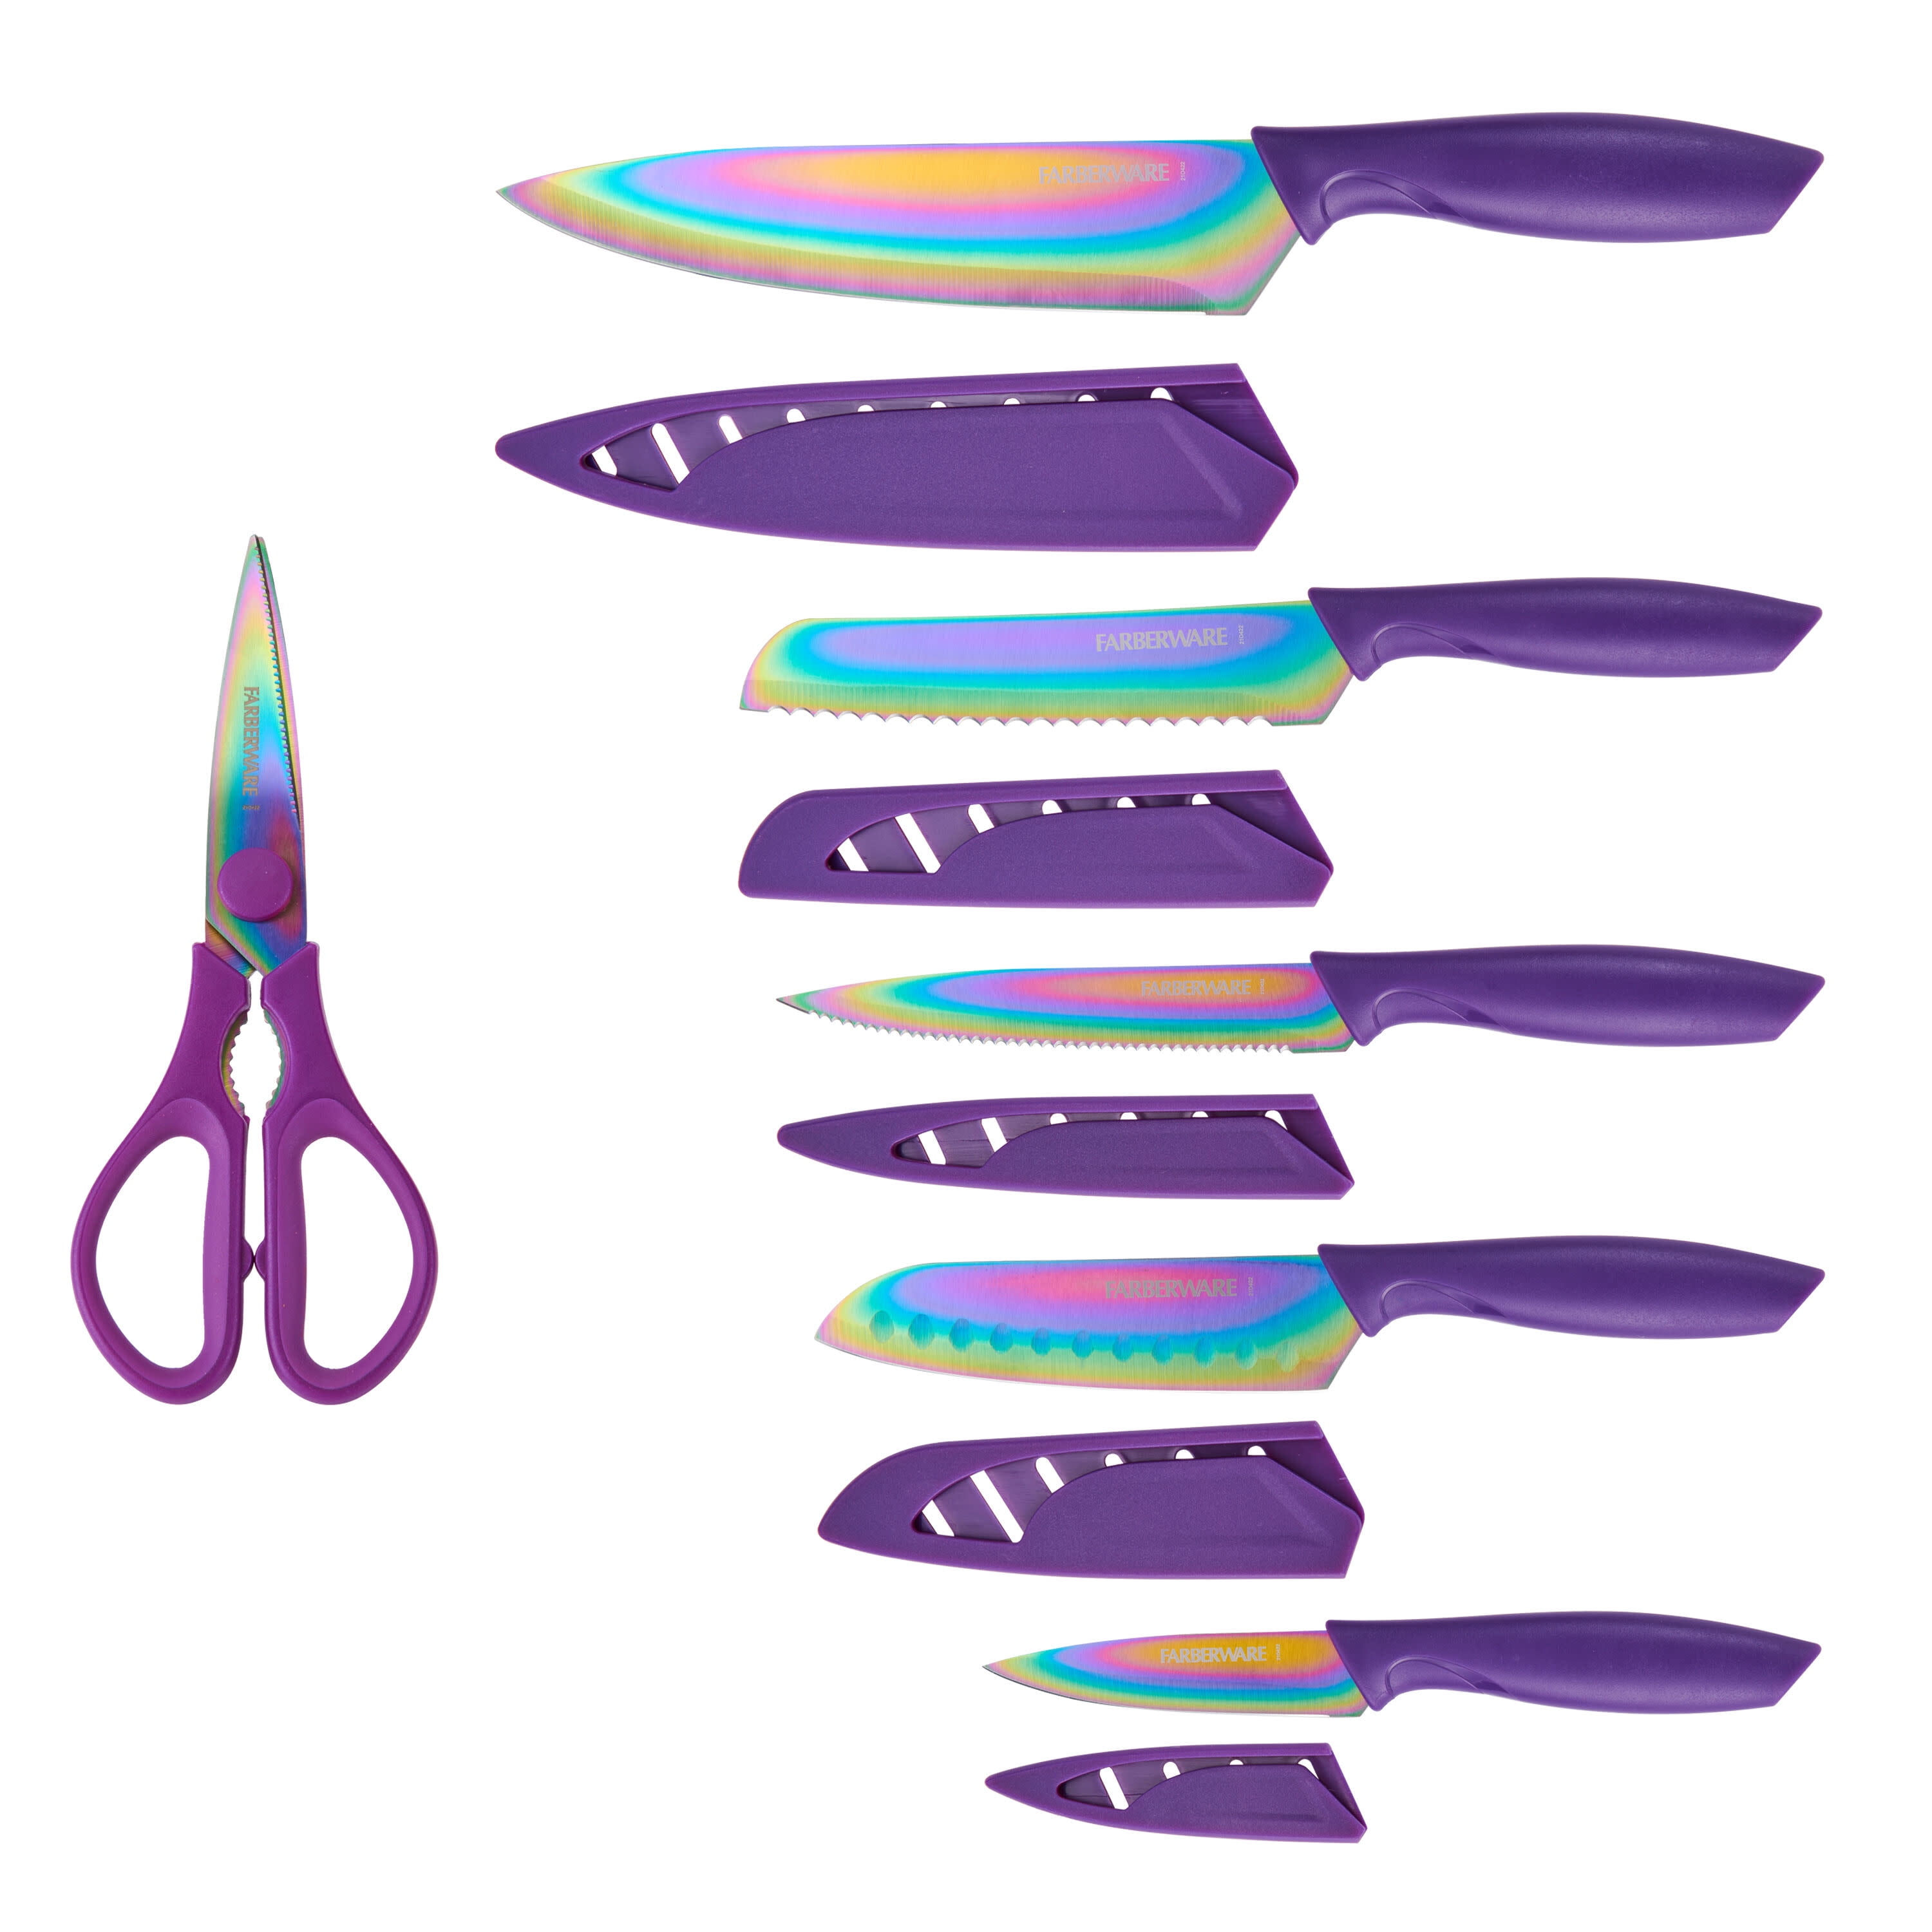 Farberware Tie Dye Pattern Knife Set with Shears and Blade Covers, 15-Piece,  Multicolor